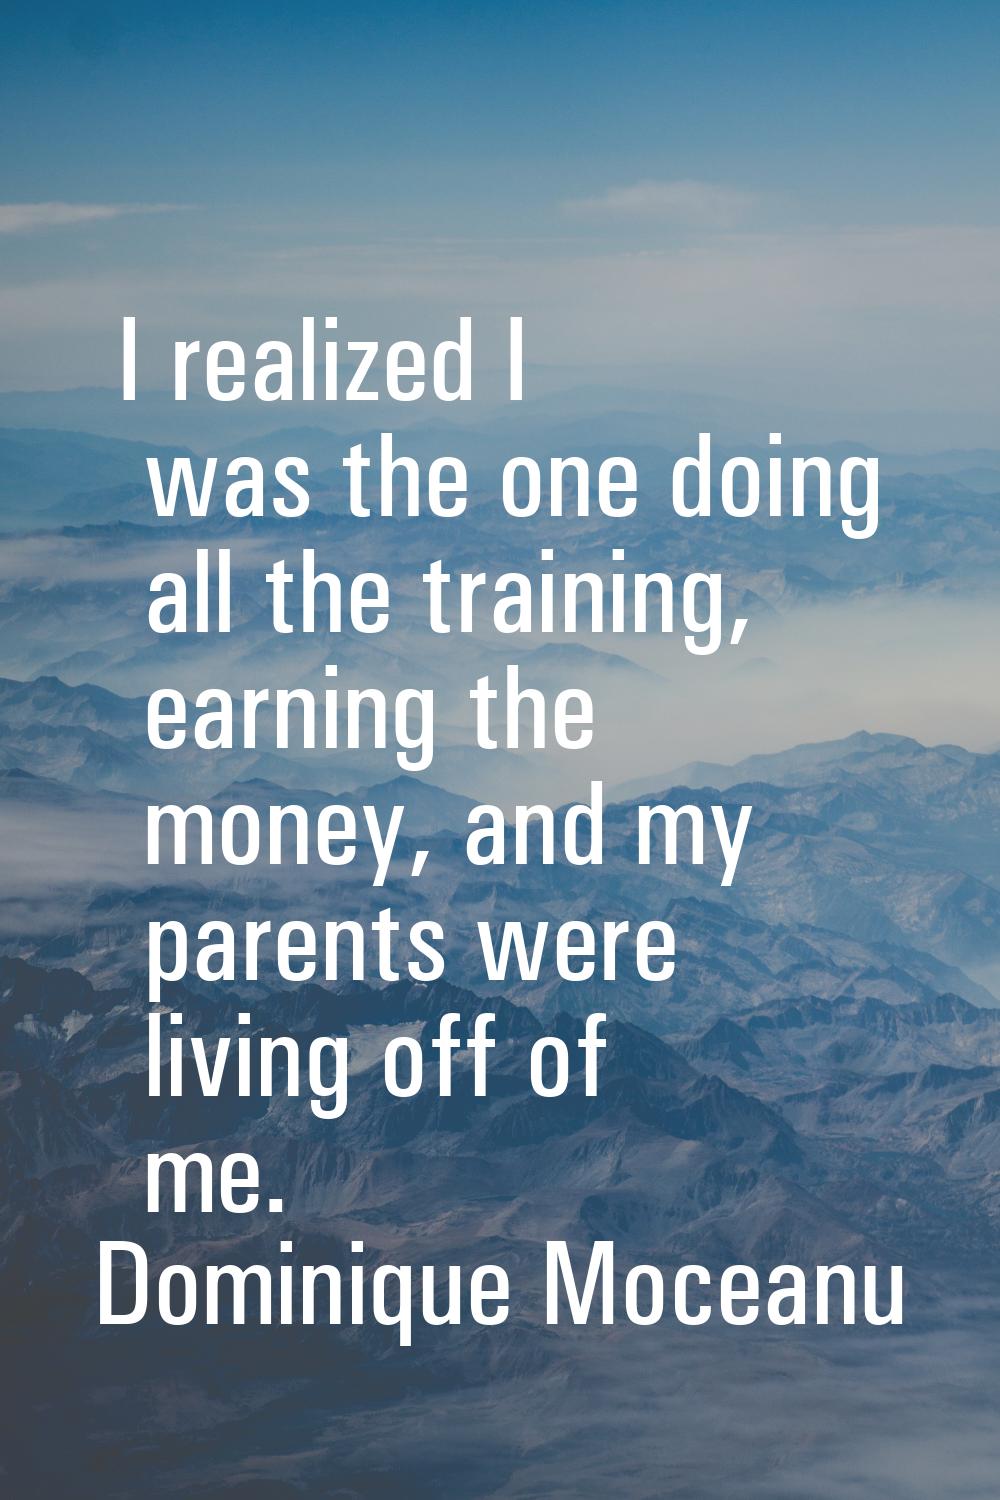 I realized I was the one doing all the training, earning the money, and my parents were living off 